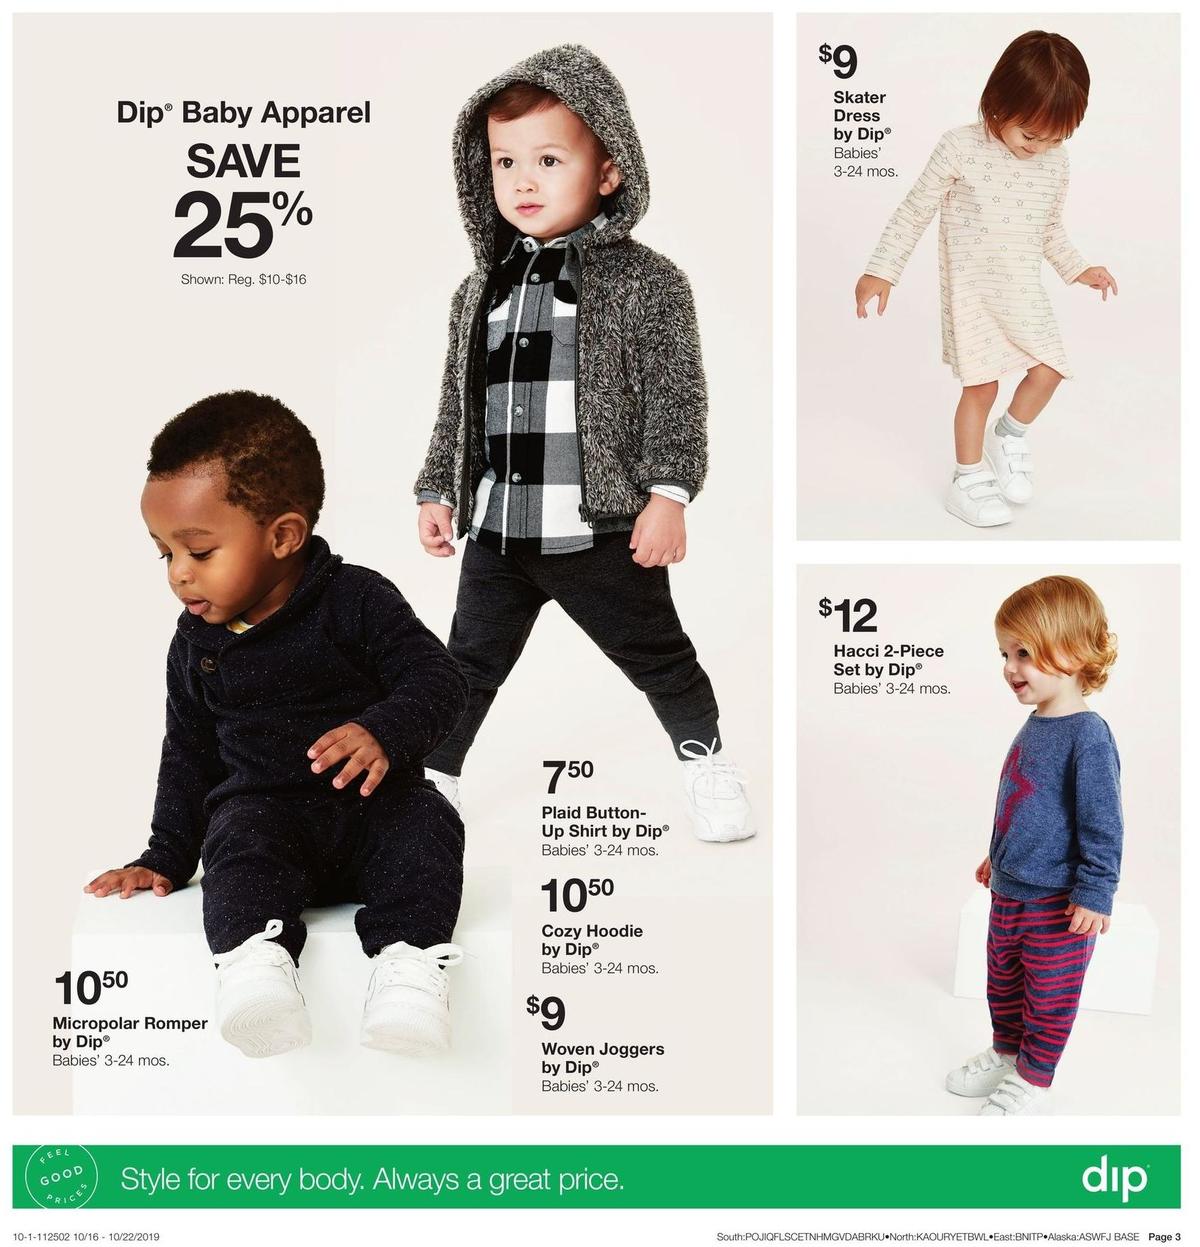 Fred Meyer Baby Sale Weekly Ad from October 16